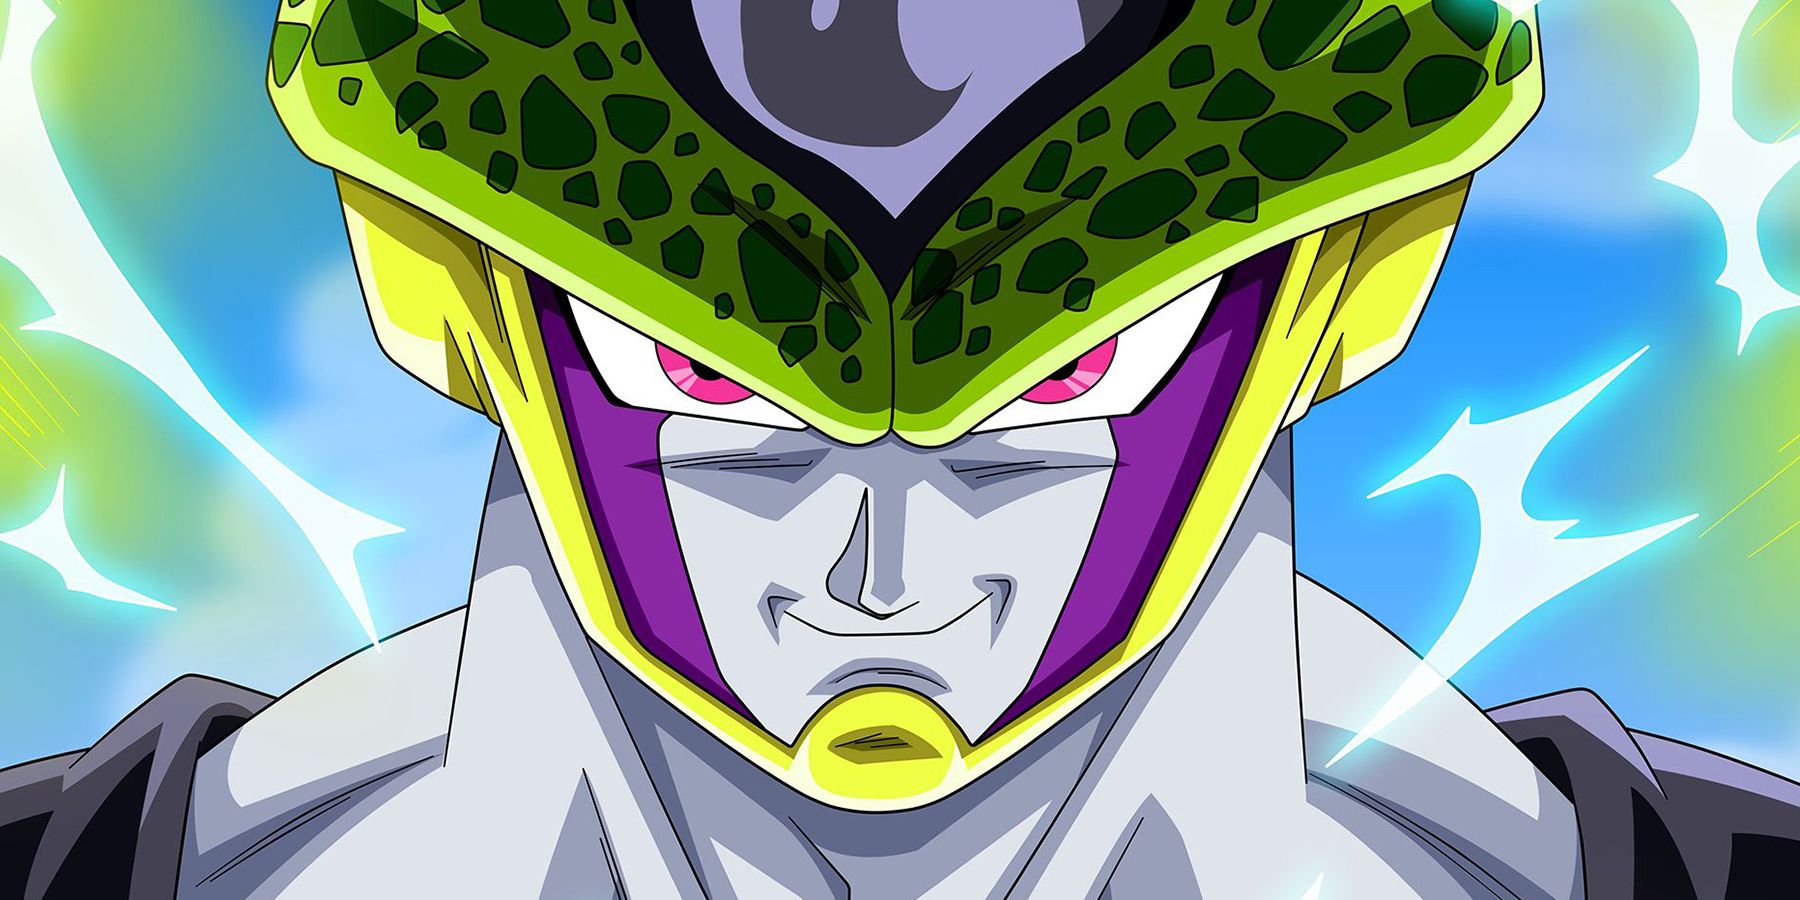 Perfect Cell exudes confidence in Dragon Ball Z.